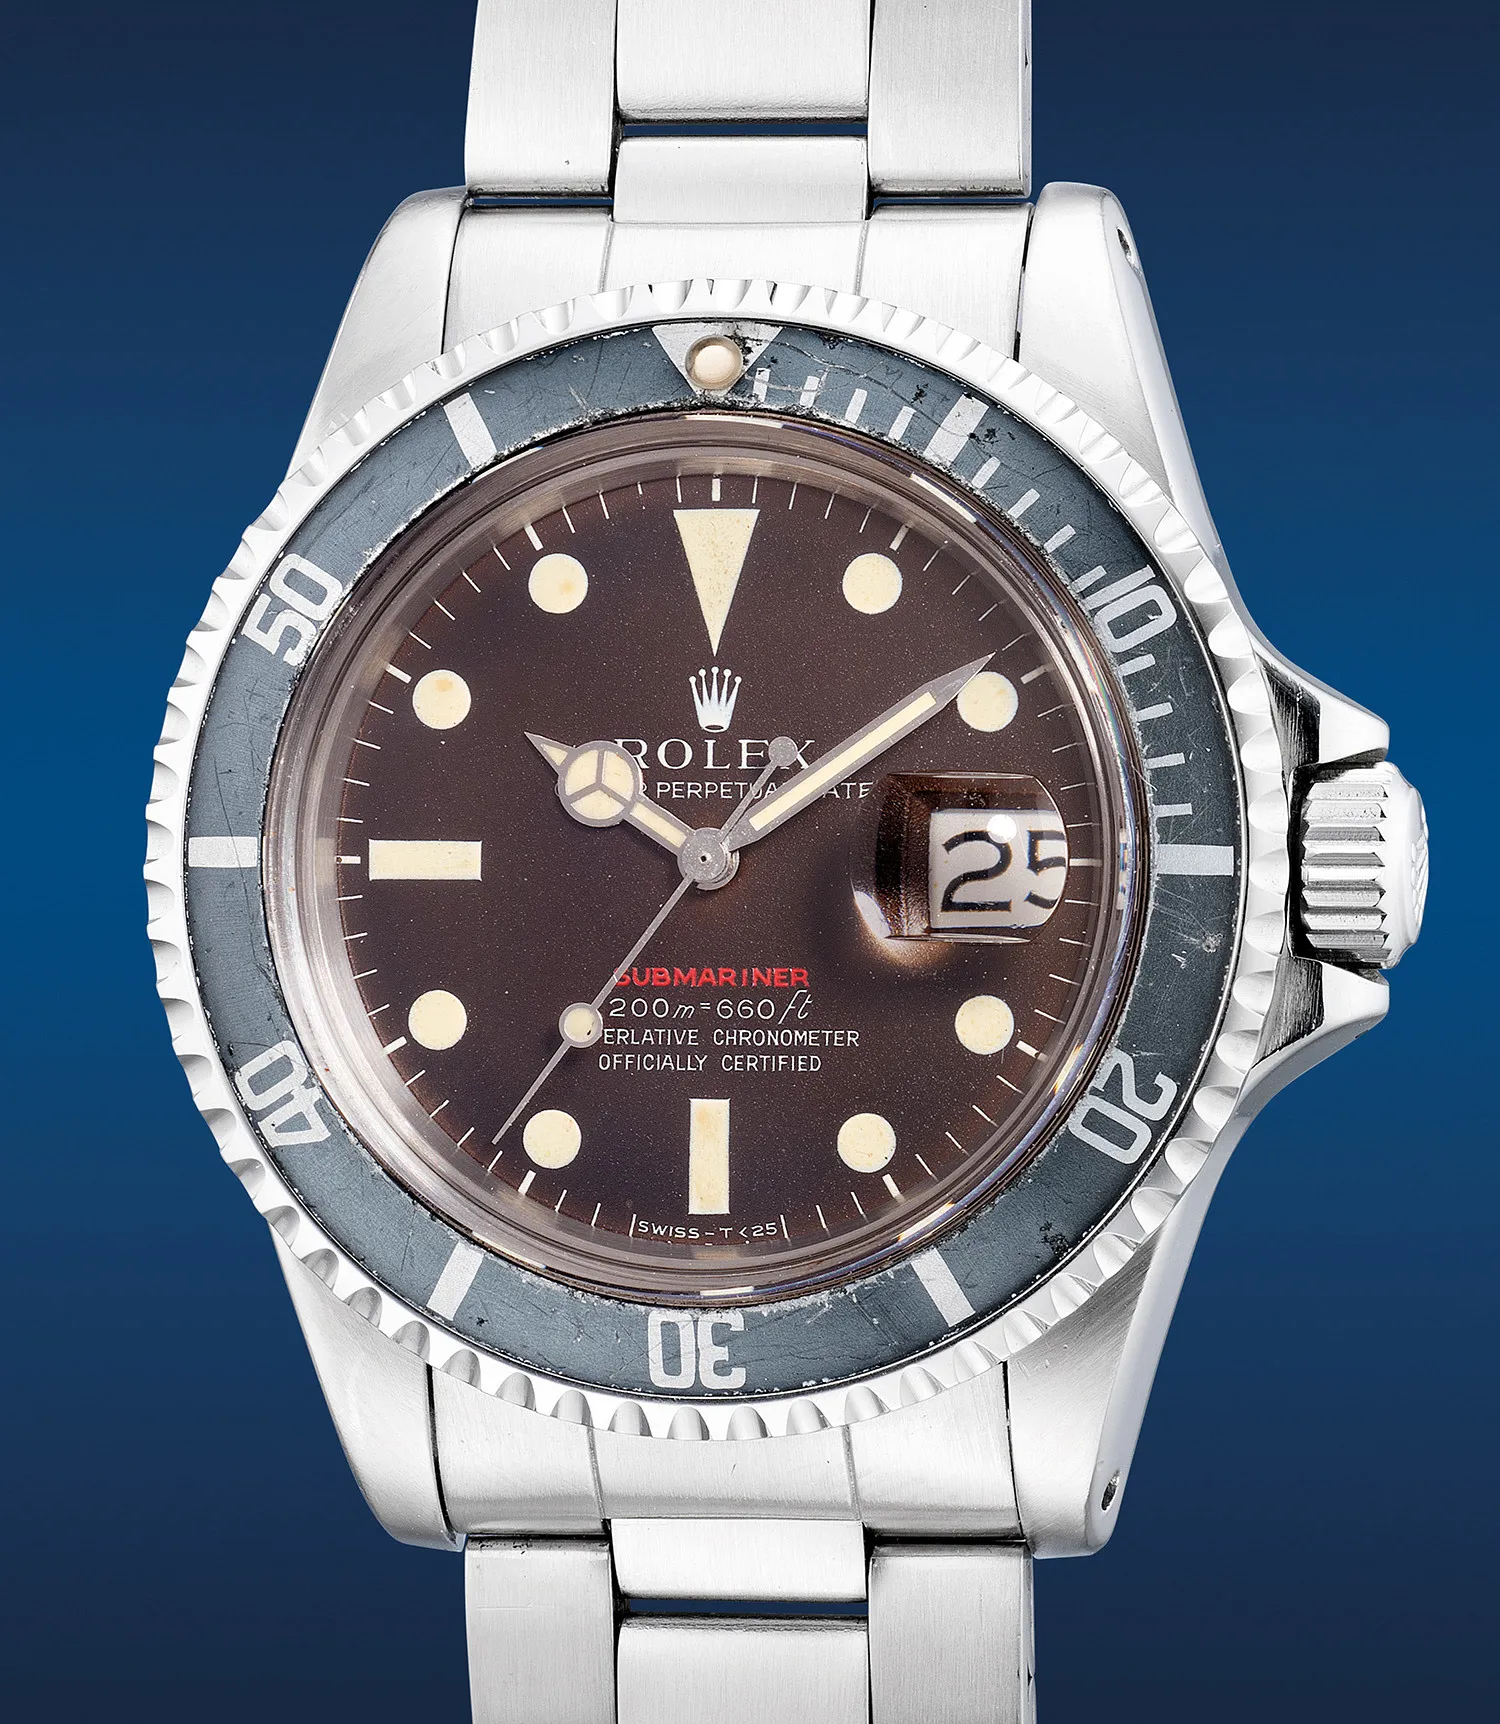 Rolex Submariner 1680 40mm Stainless steel MKII "tropical"